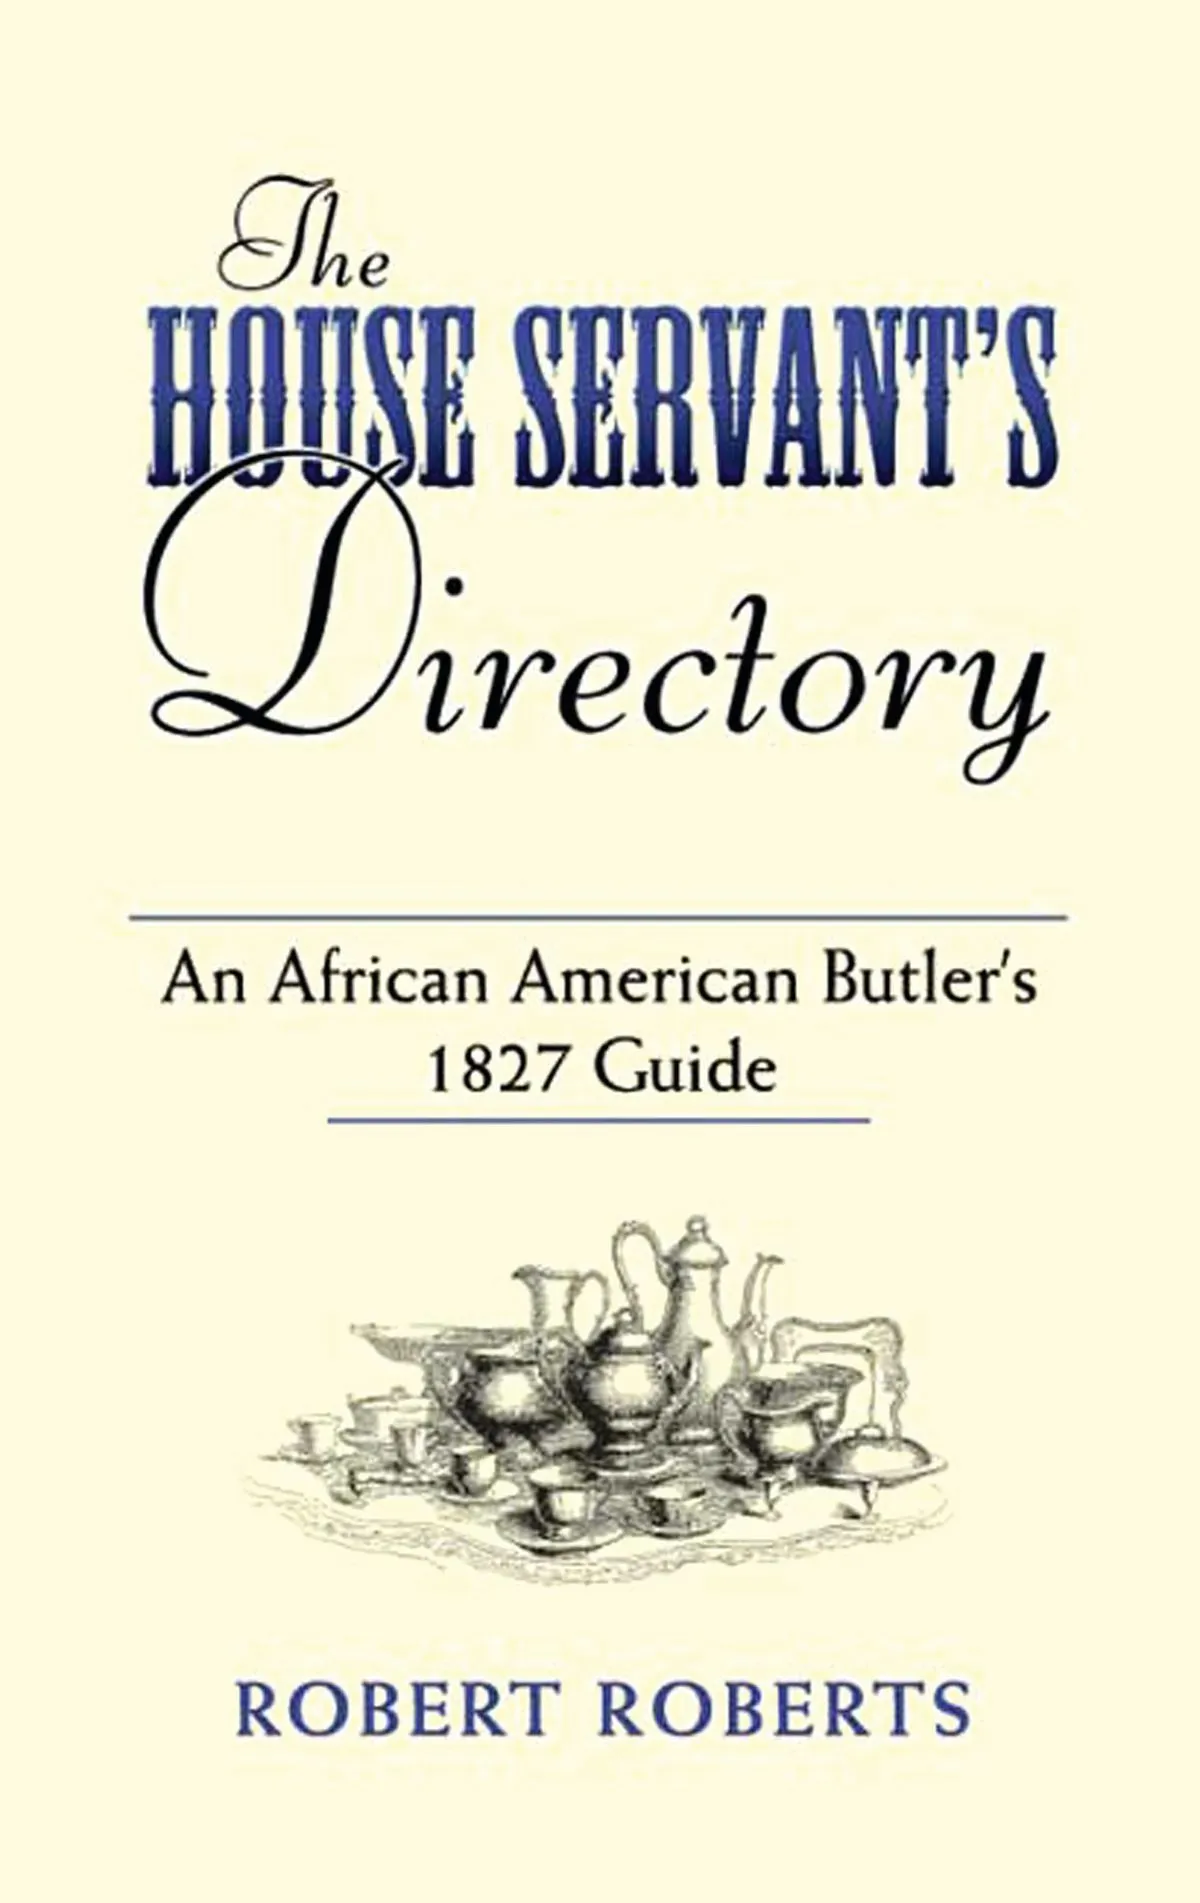 The house servant's directory